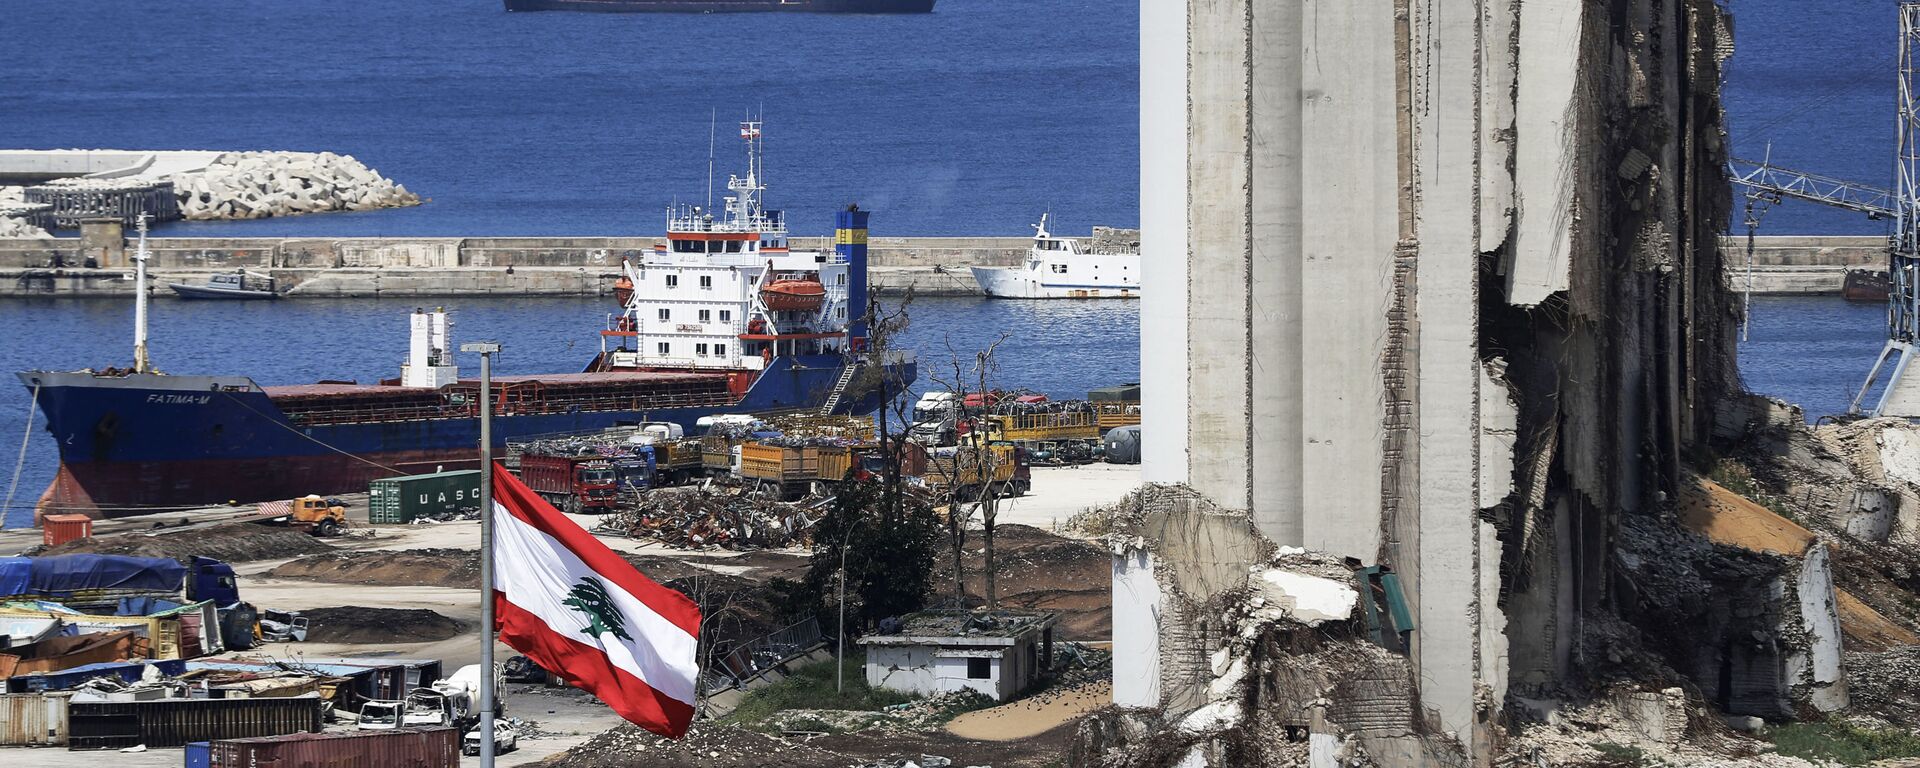 A picture shows a view of the damaged grain silos at the port of the Lebanese capital Beirut, on April 9, 2021, still reeling from the destruction due to a catastrophic blast in a harbour storage unit last August that killed more than 200 people and damaged swathes of the capital, with the Togo-flagged Fatima M bulk carrier ship moored nearby.  - Sputnik International, 1920, 27.09.2021